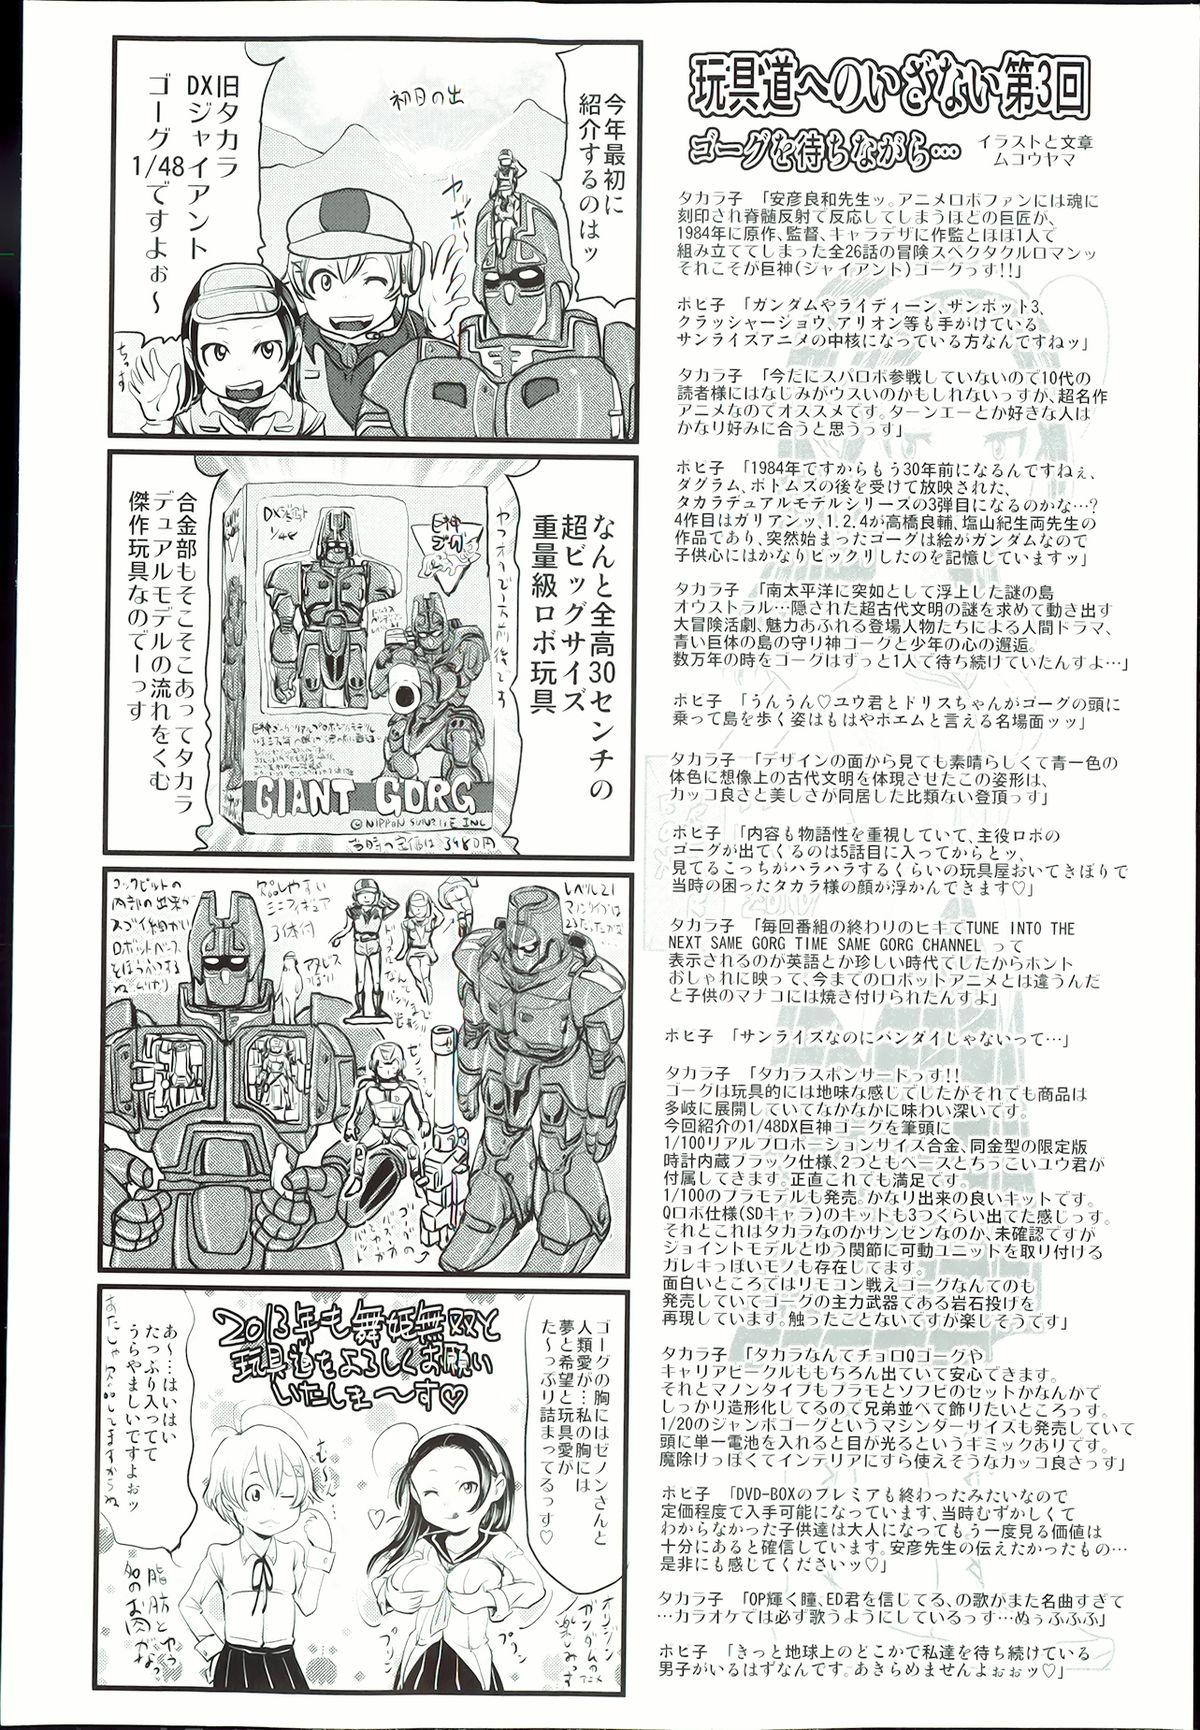 Longhair COMIC Maihime Musou Act. 04 2013-03 Perra - Page 2